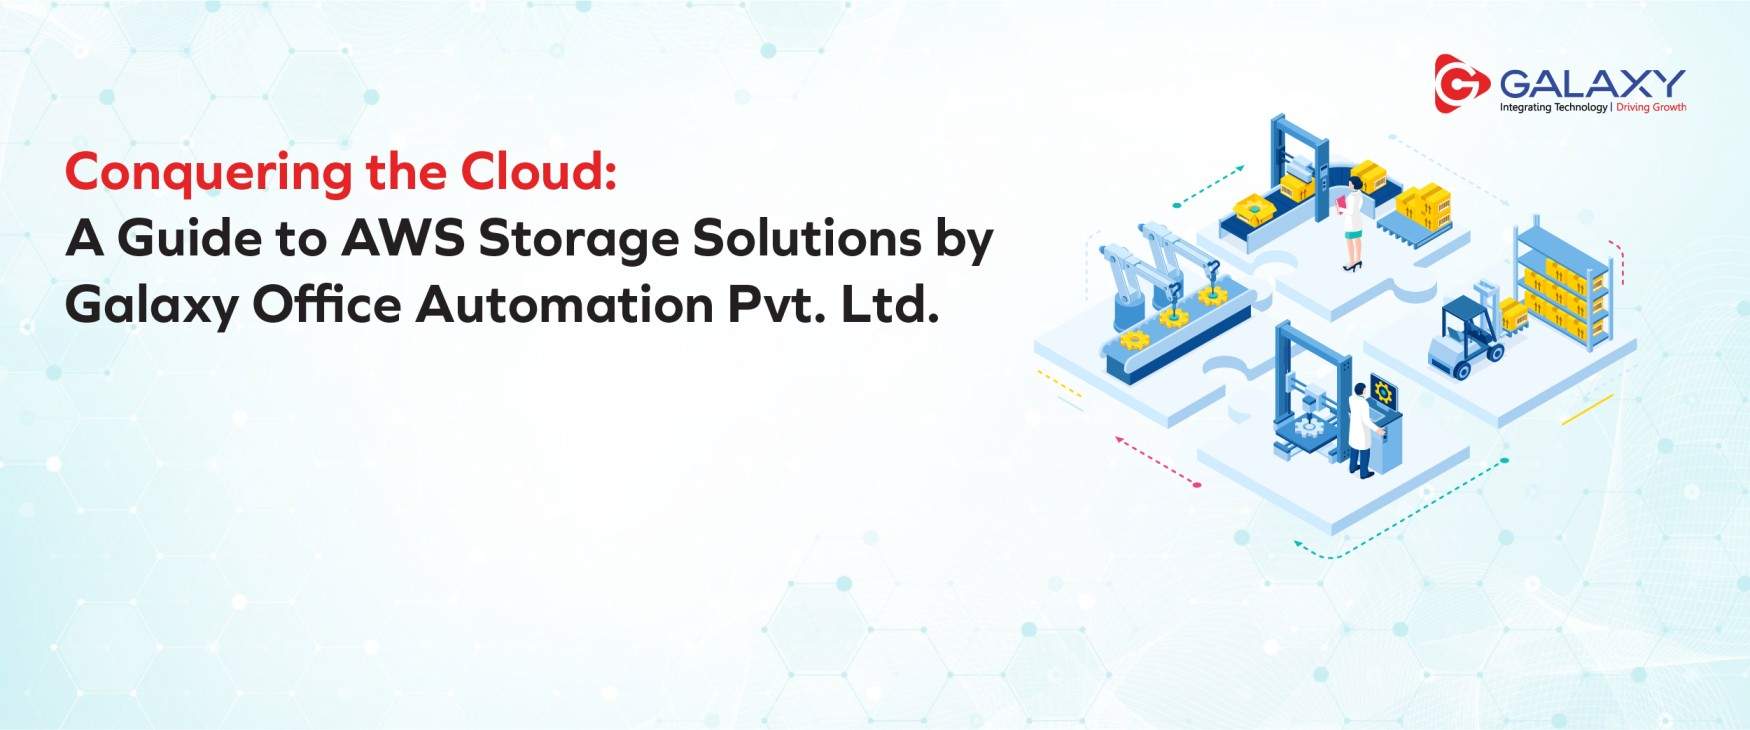 Conquering the Cloud: A Guide to AWS Storage Solutions by Galaxy Office Automation Pvt. Ltd.